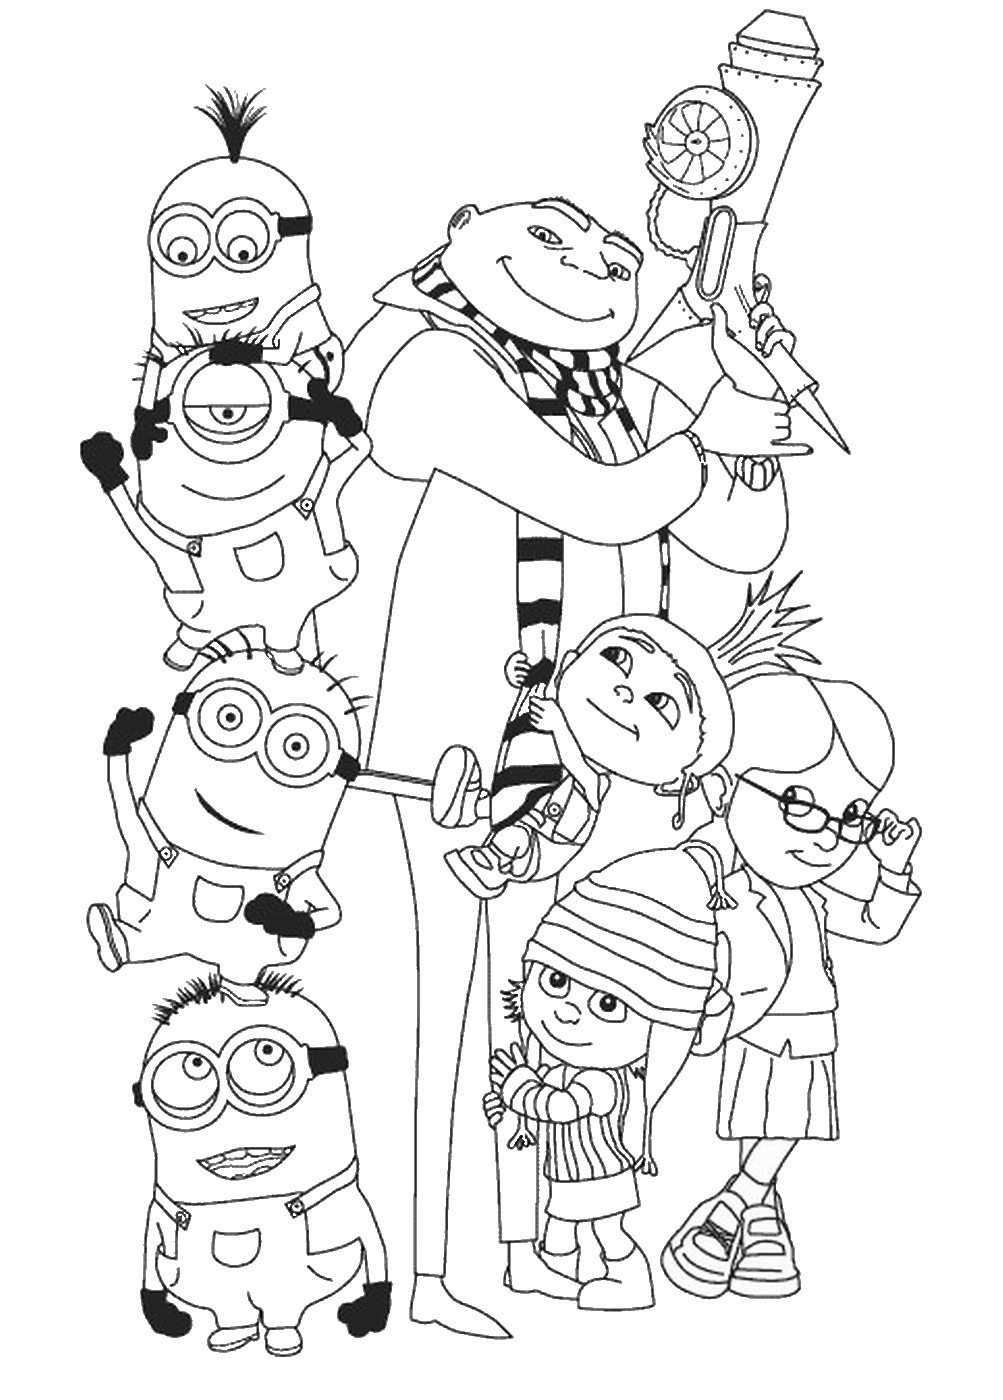 Despicable Me 3 Coloring Pages Printable Guide Coloring Page Guide ...